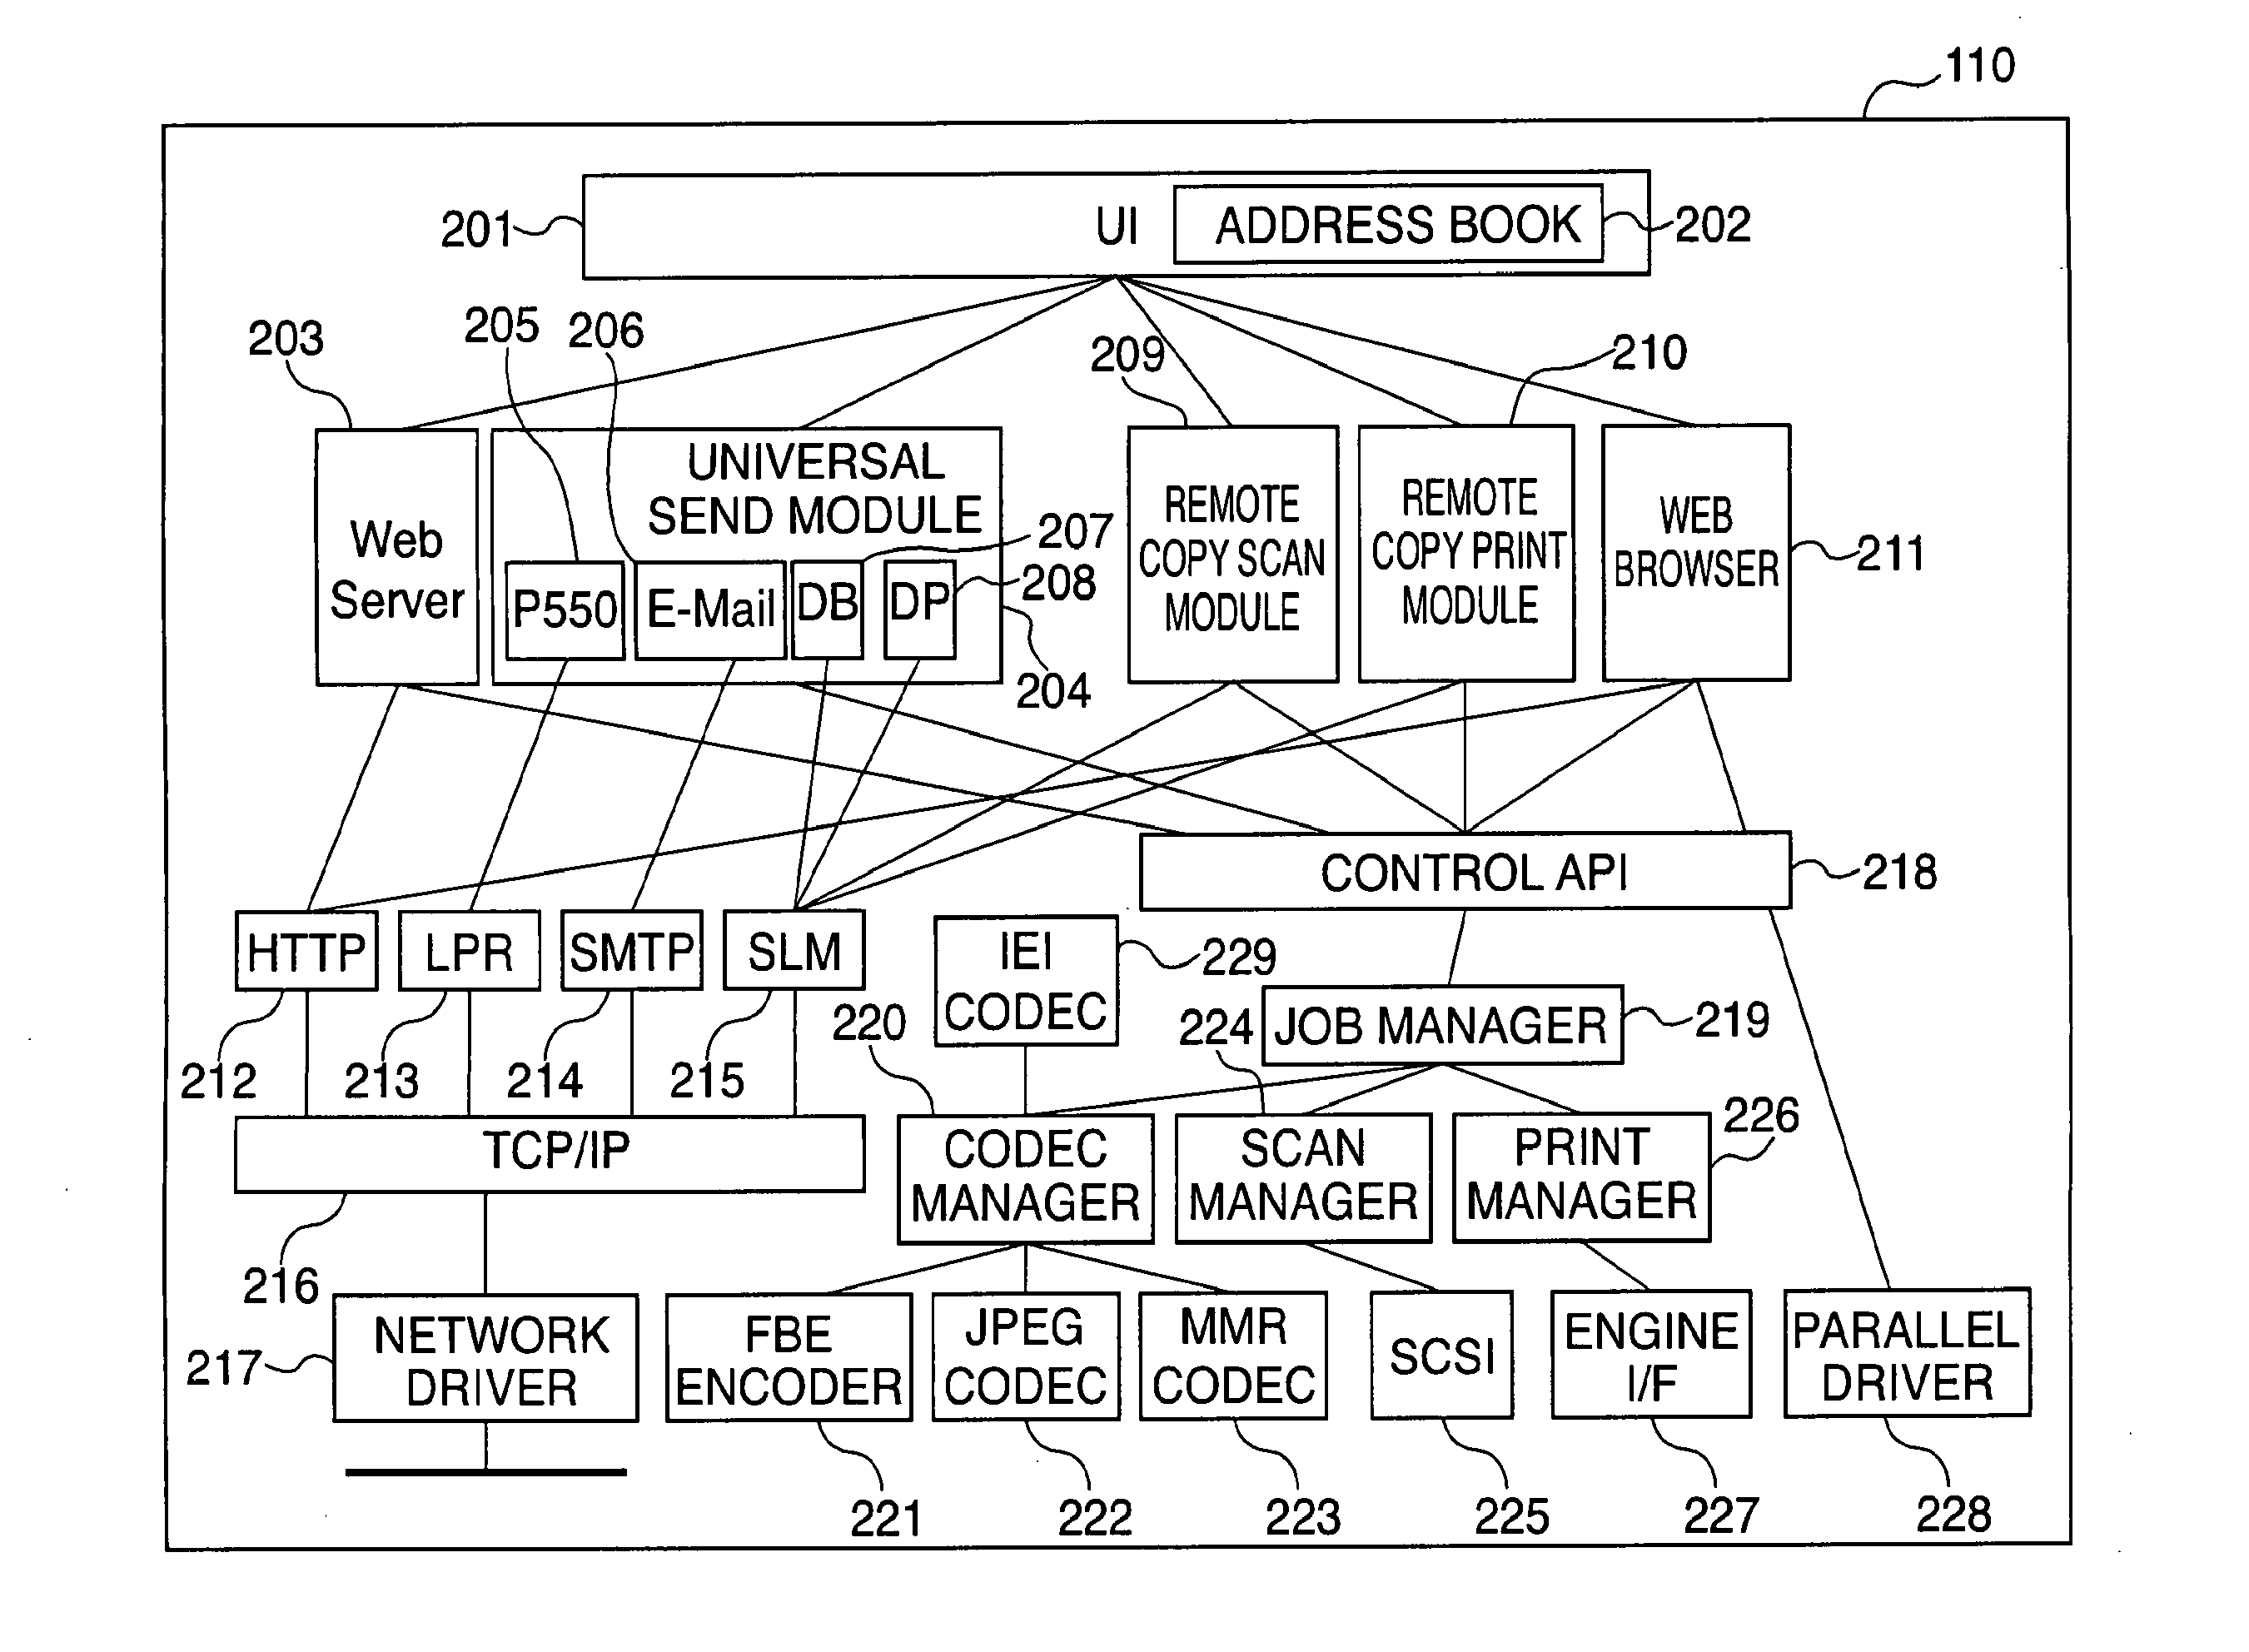 Embedded device, control method therefor, program for implementing the control method, and storage medium storing the program